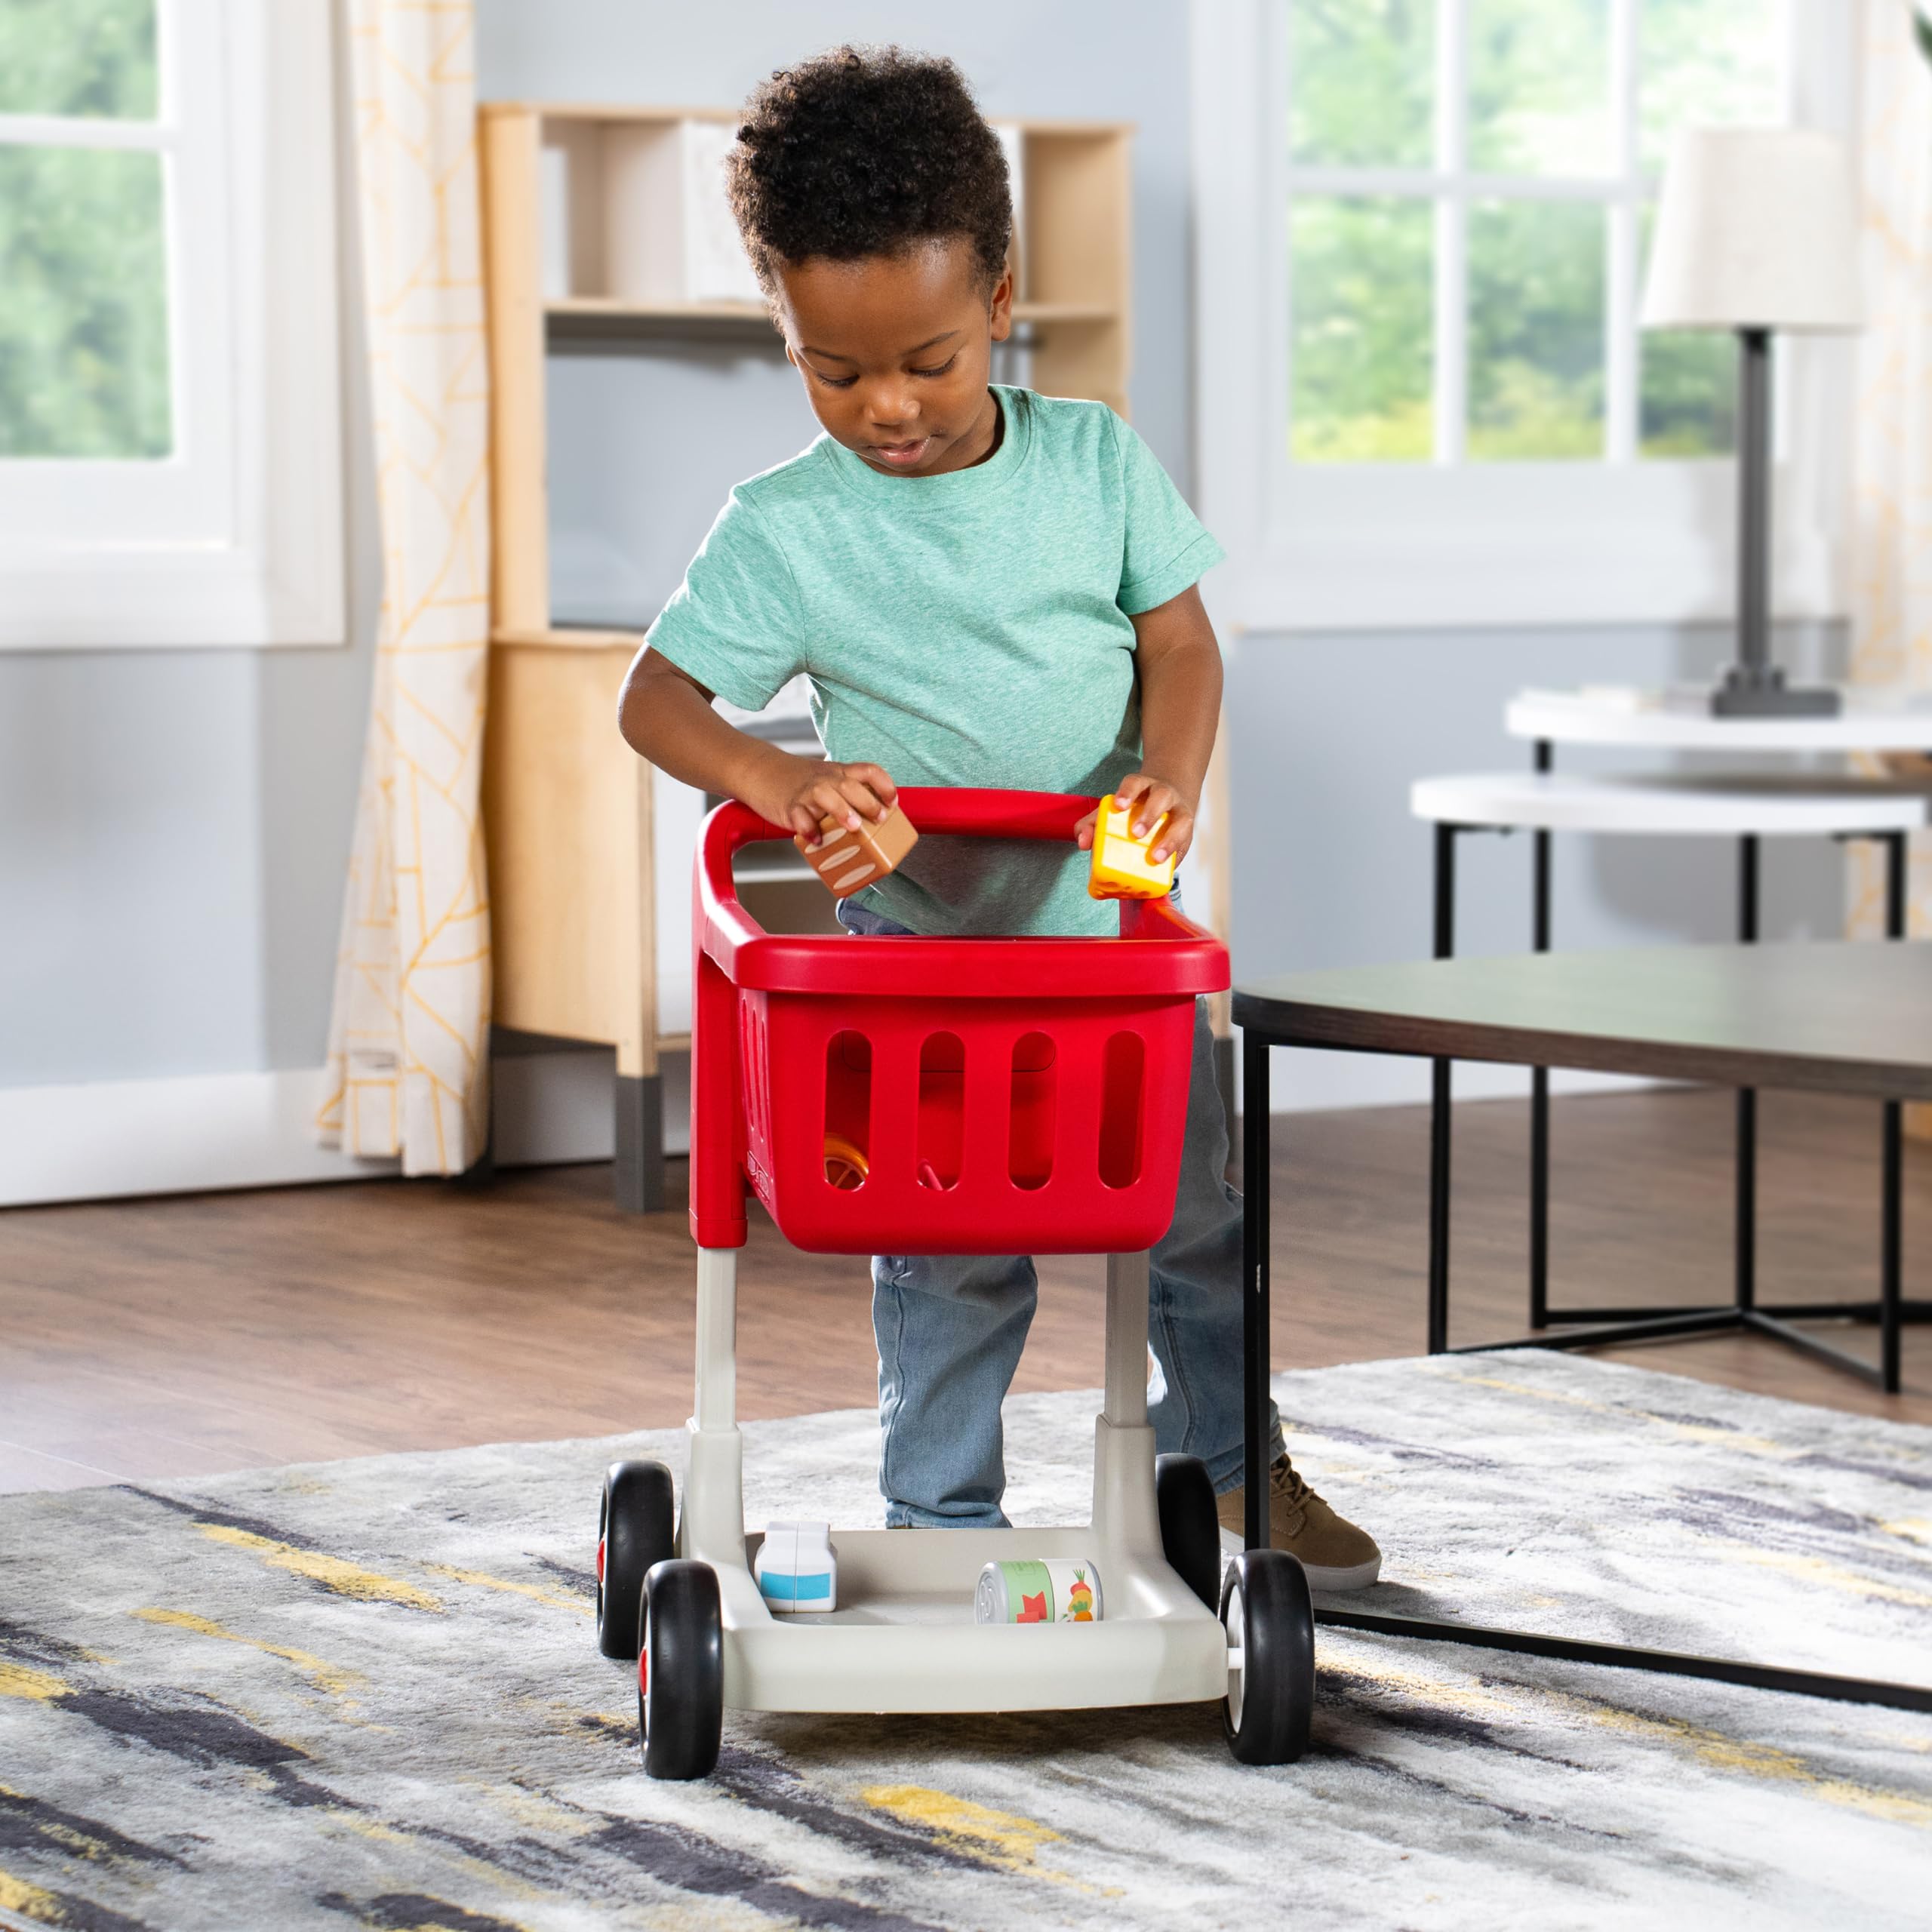 Radio Flyer Scan & Sort Shopping Cart with Lights & Sounds, Baby Walker with Wheels, Red Shopping Cart for Kids Ages 1+